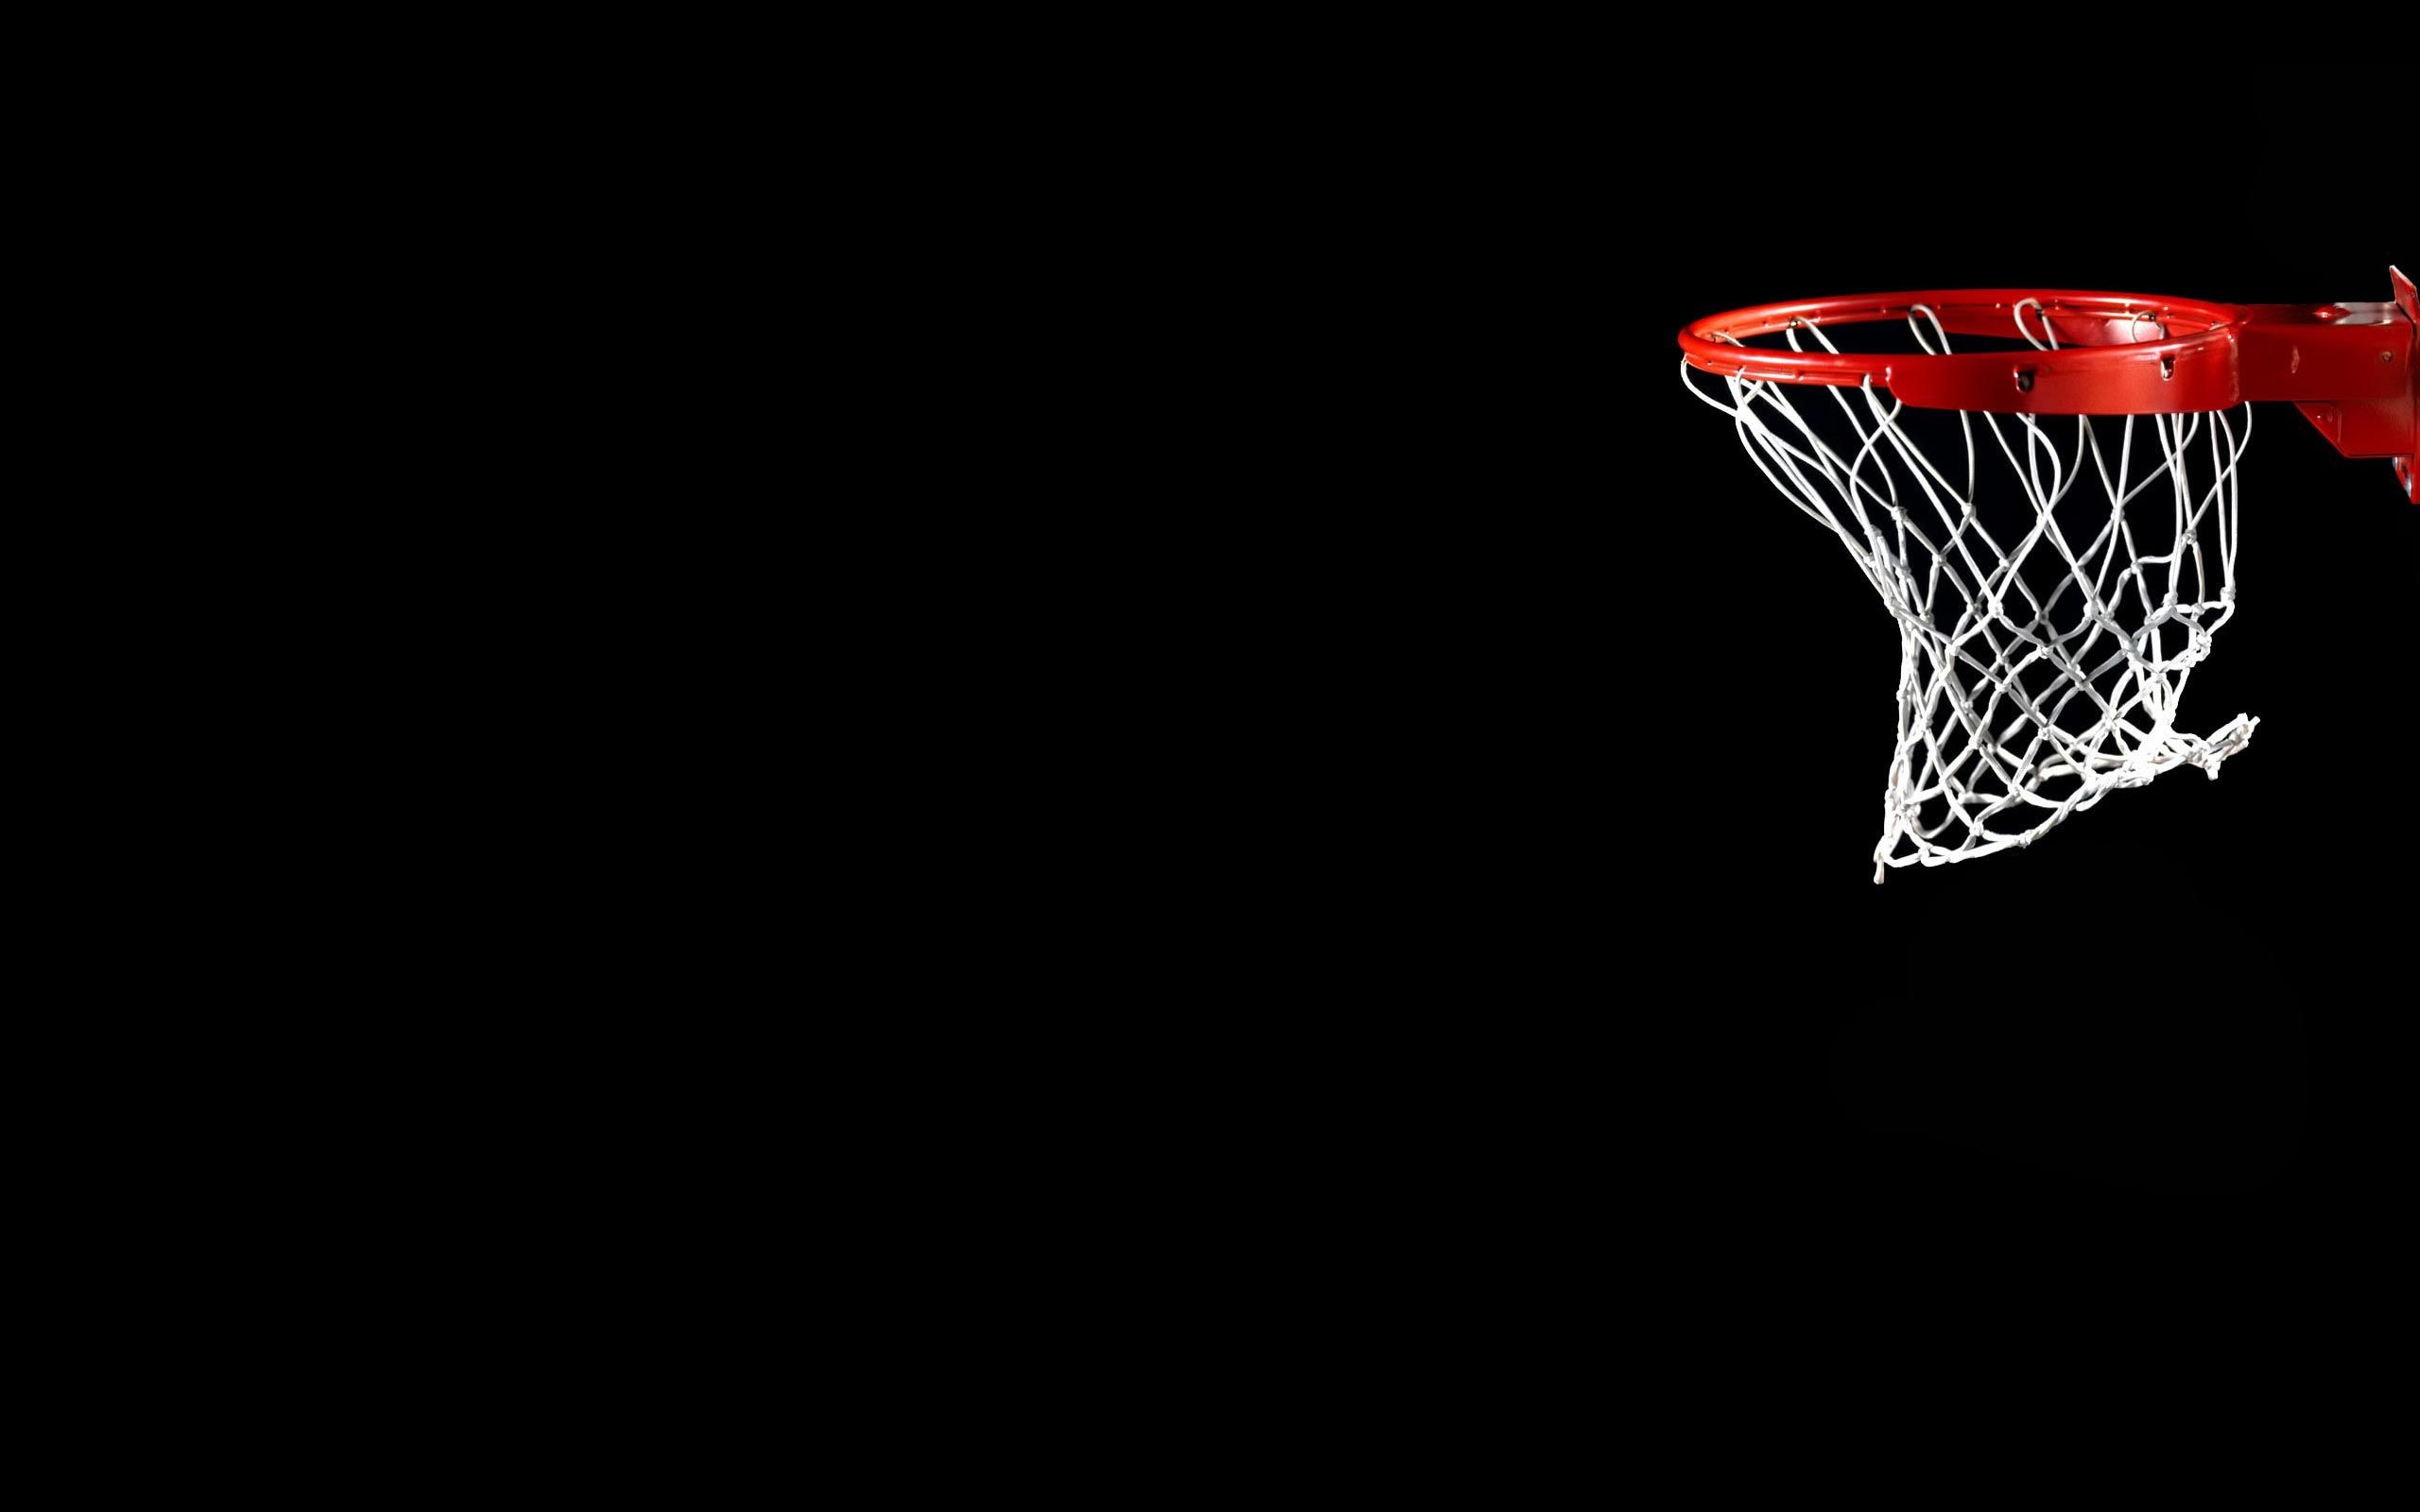 Nike Wallpaper Basketball The Best Image In